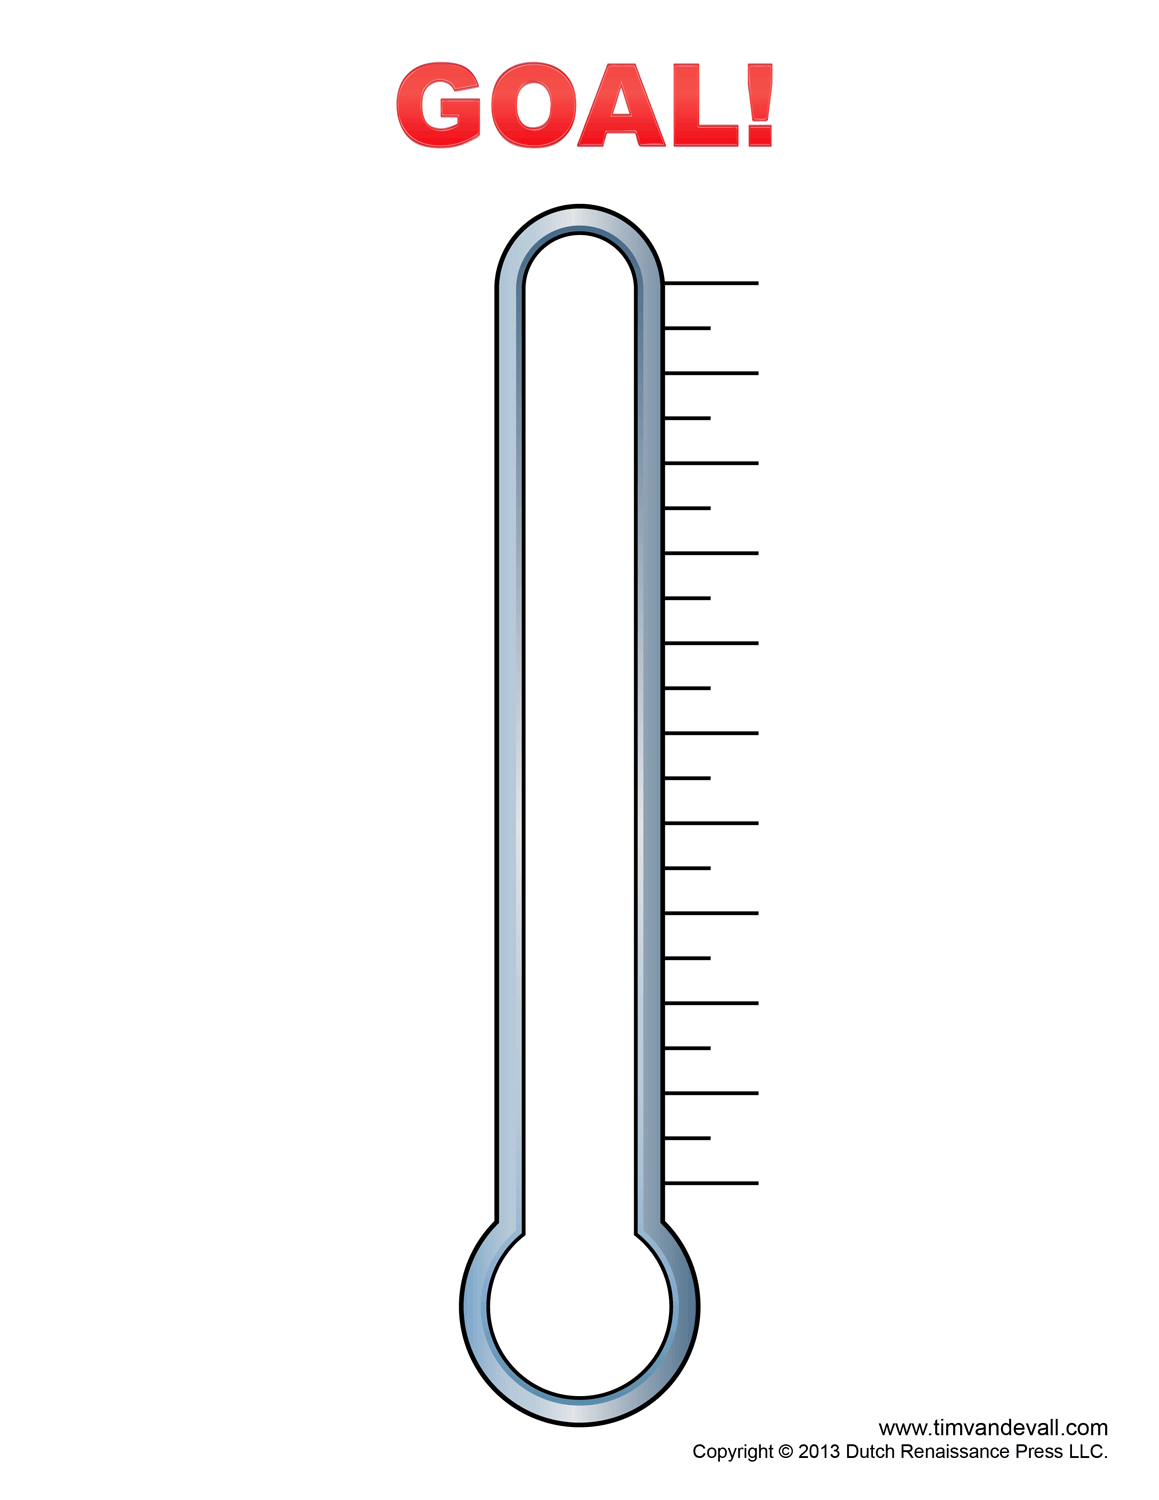 Fundraising Thermometer Template | For J | Goal Thermometer - Free Printable Thermometer Goal Chart